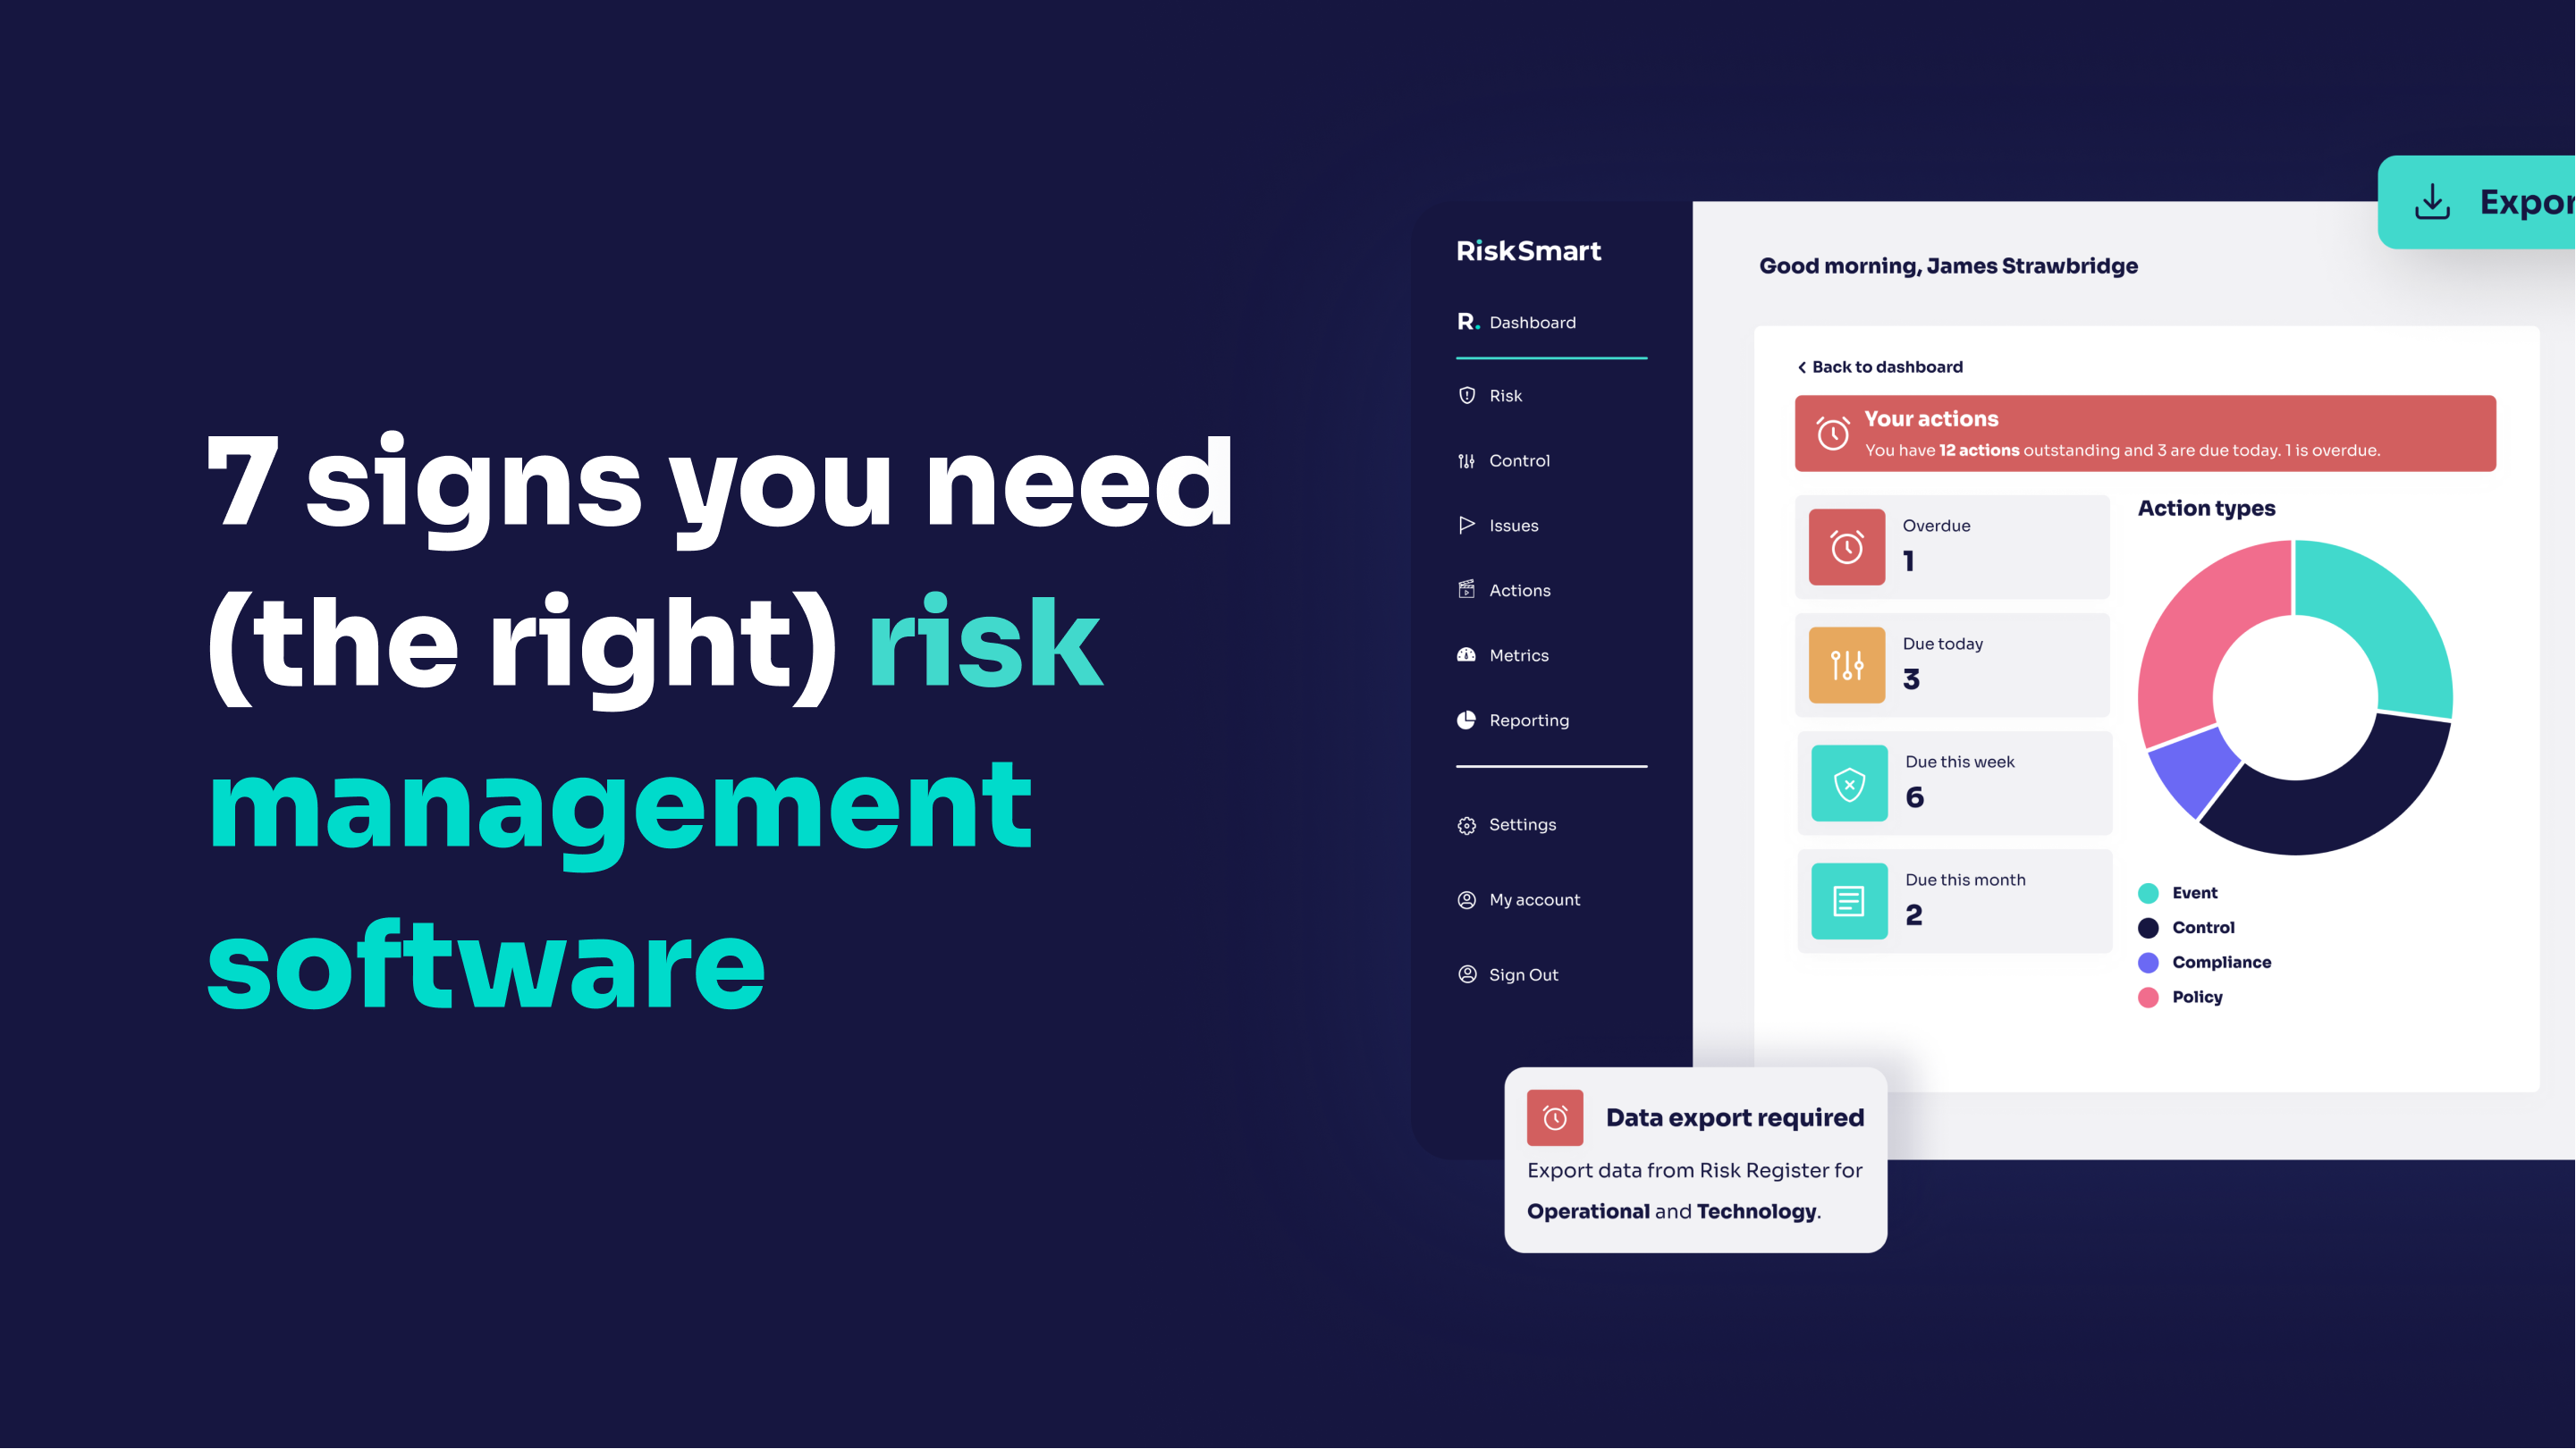 Header image showing RiskSmart platform with the caption 7 signs you need (the right) risk management software